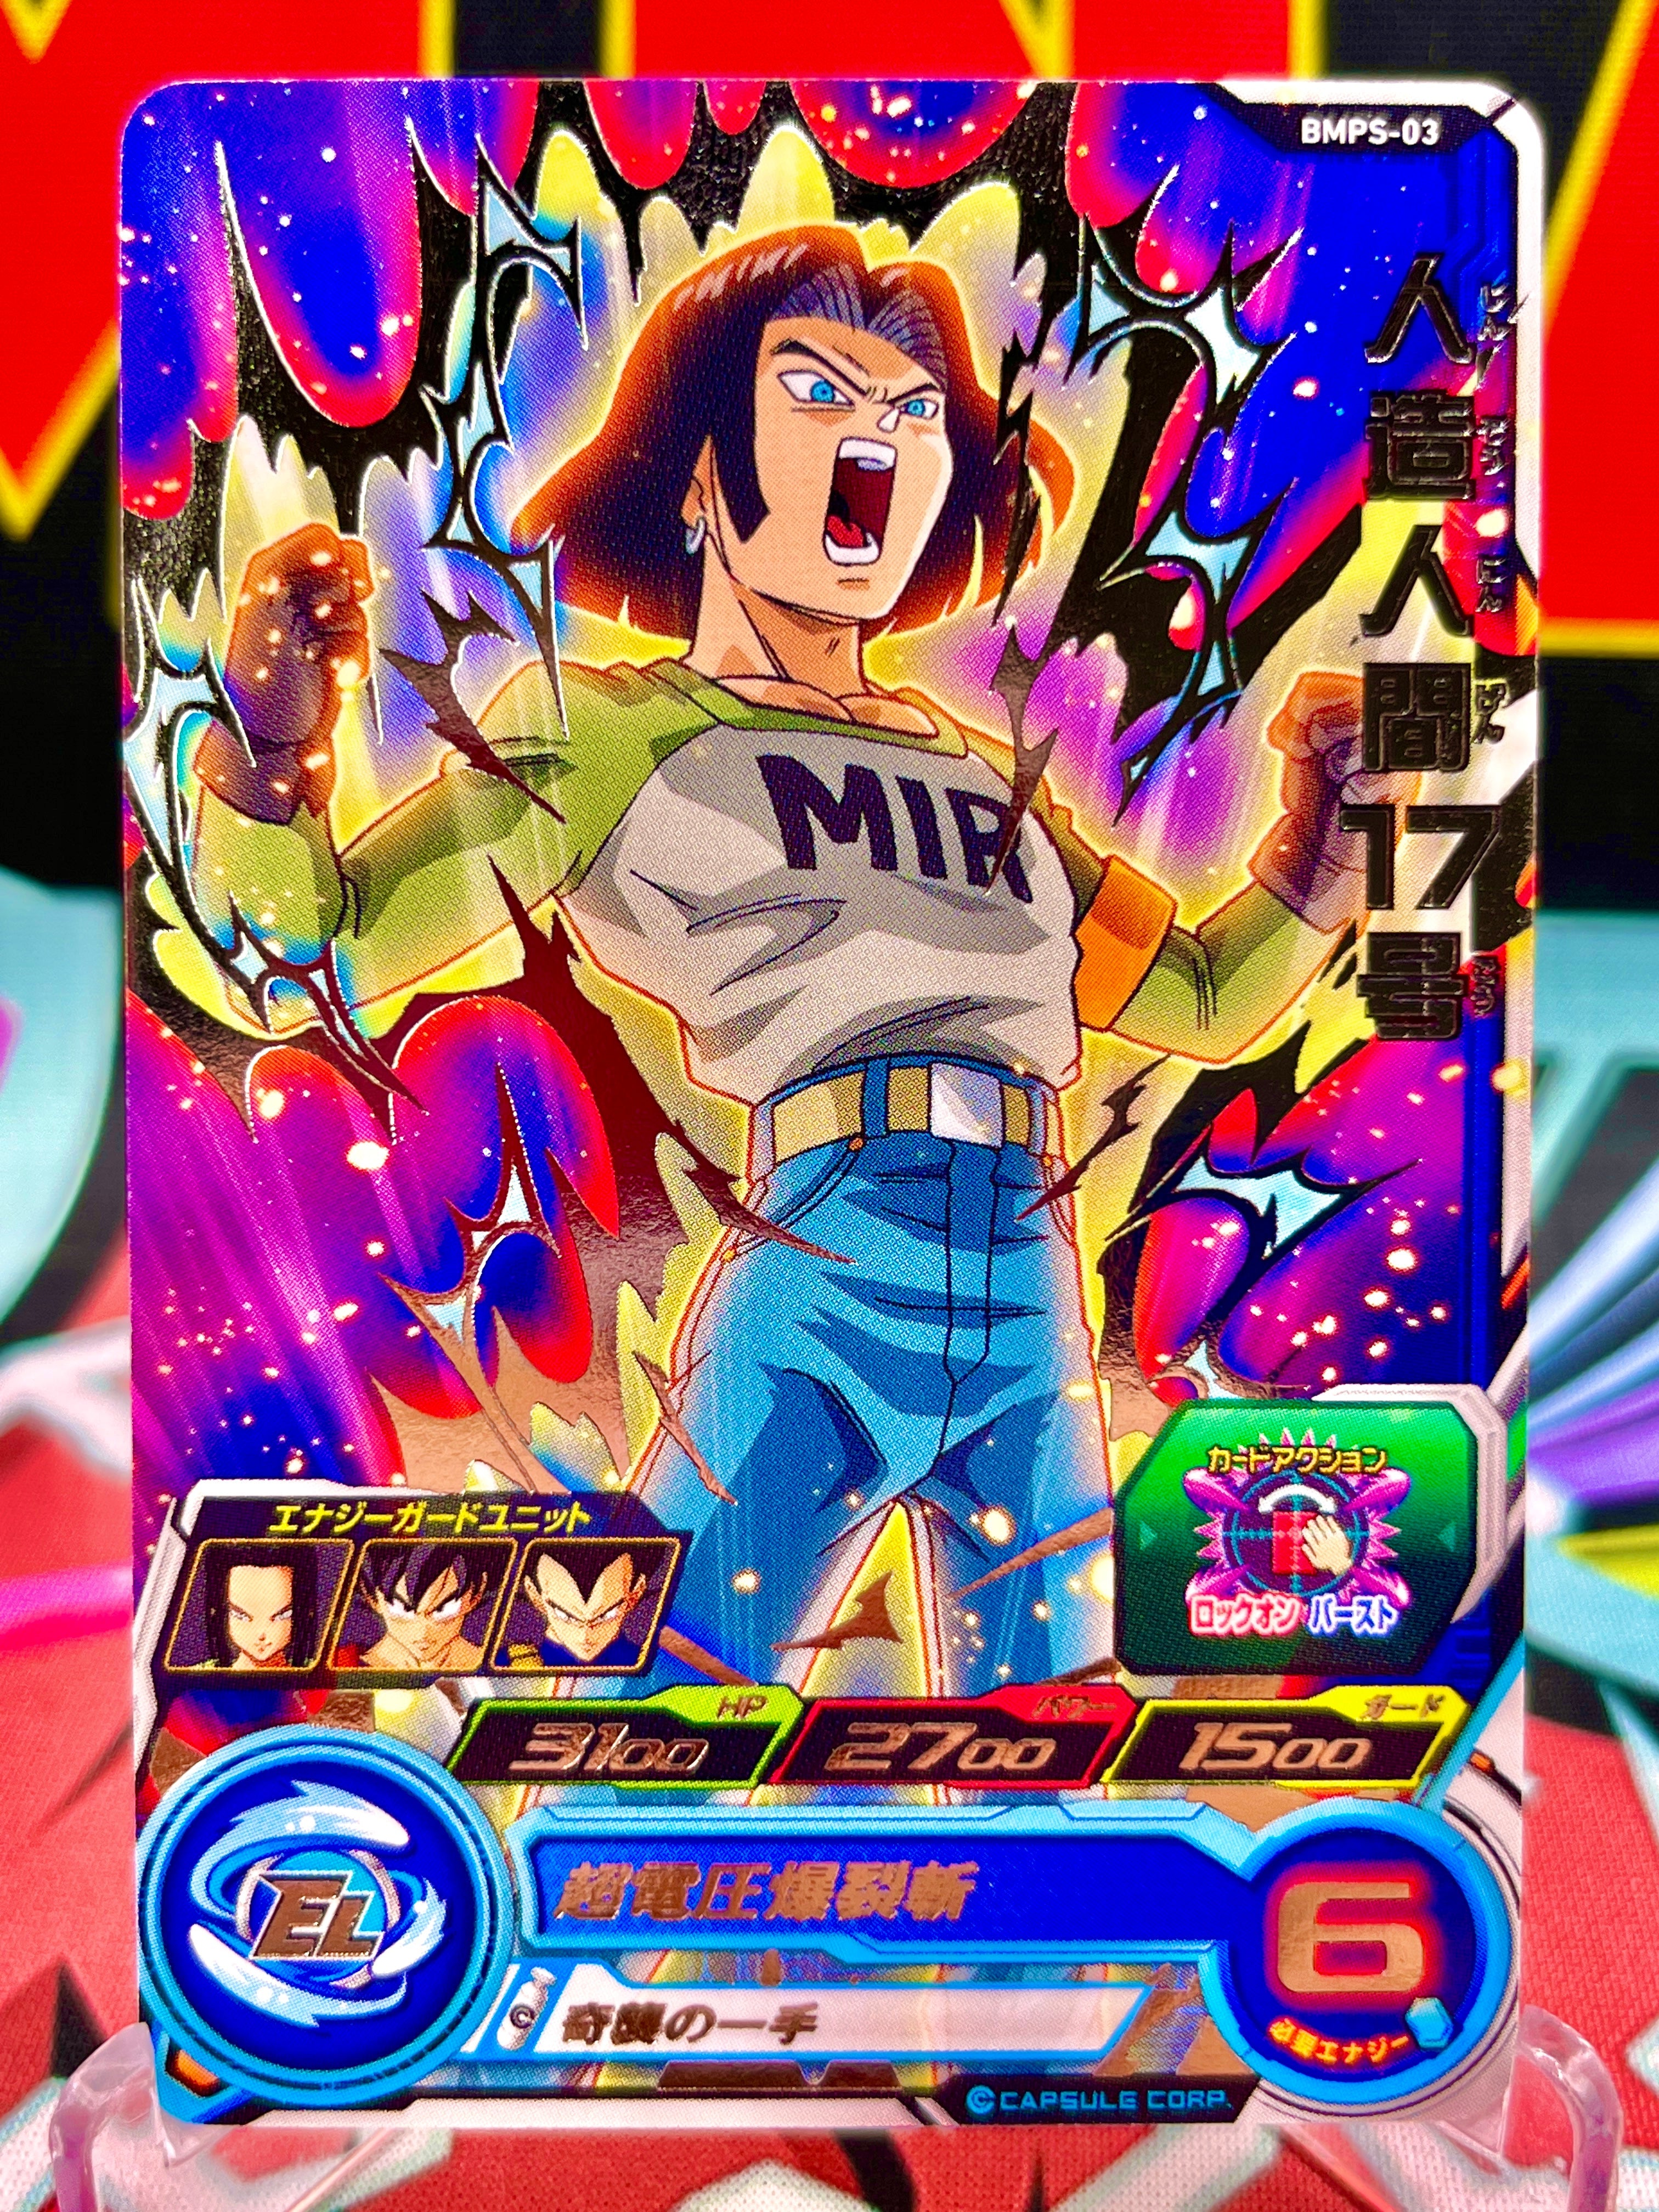 BMPS-03 Android 17 Promo (2020)